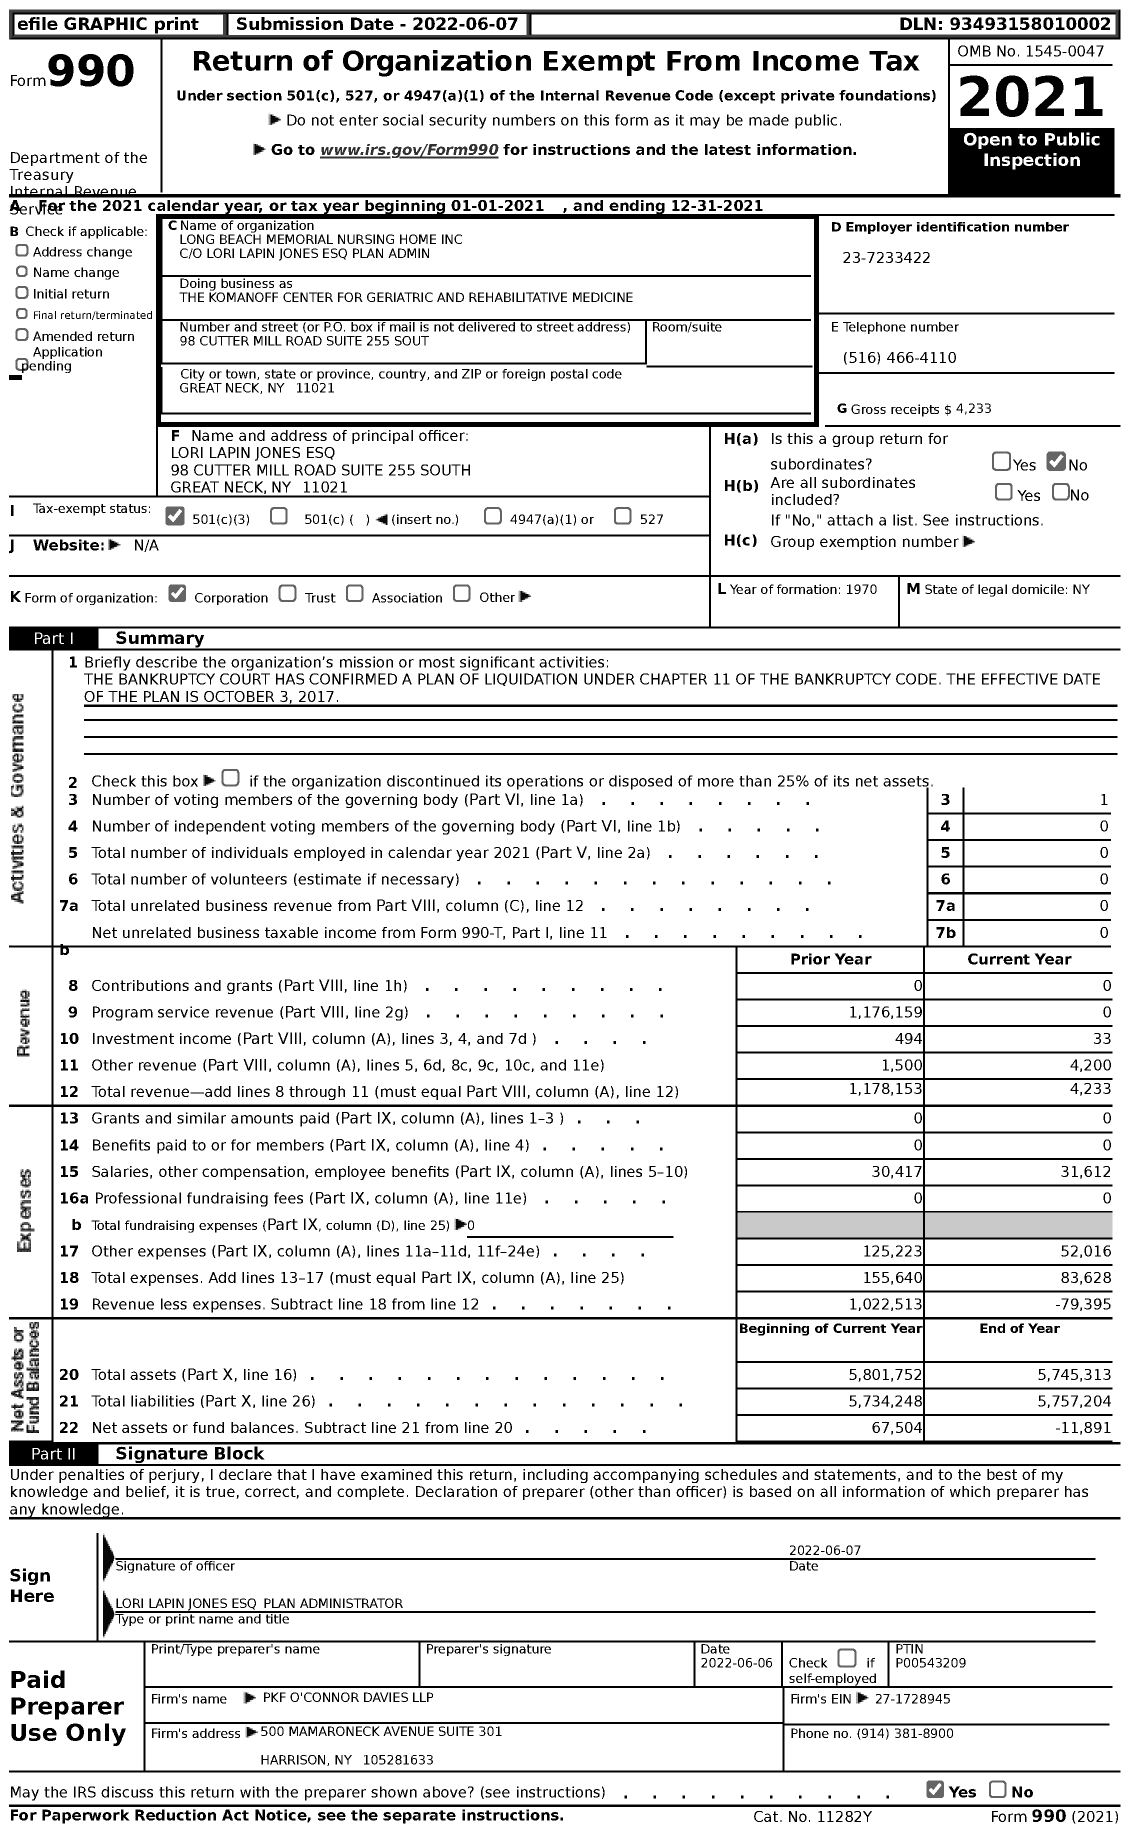 Image of first page of 2021 Form 990 for The Komanoff Center for Geriatric and Rehabilitative Medicine